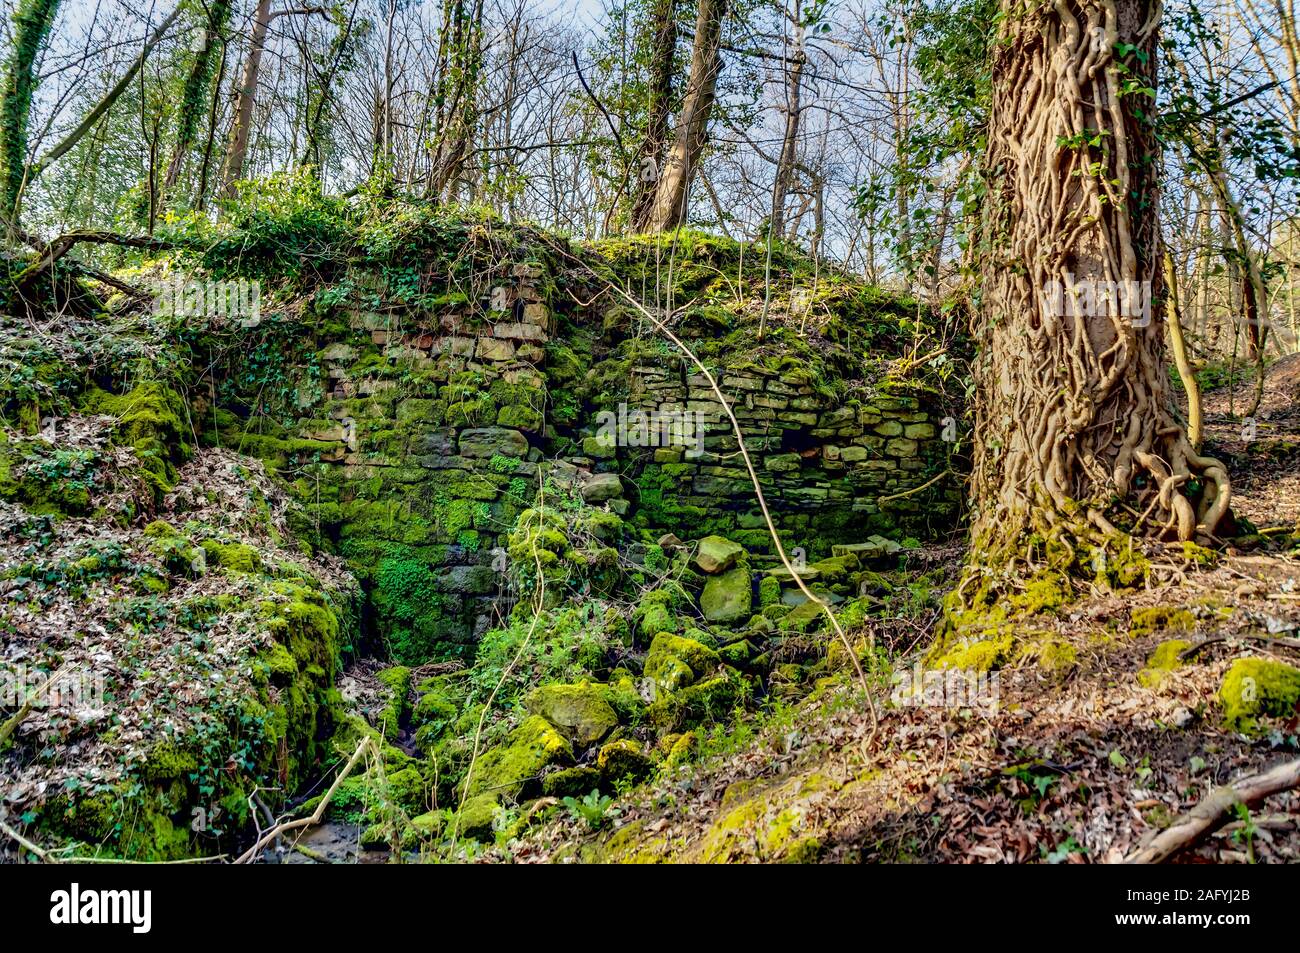 Remains of the old Ryecroft Mill dam at Ryecroft Glen, Ecclesall, Sheffield, previously used for lead smelting. The waterwheel pit and dam wall. Stock Photo